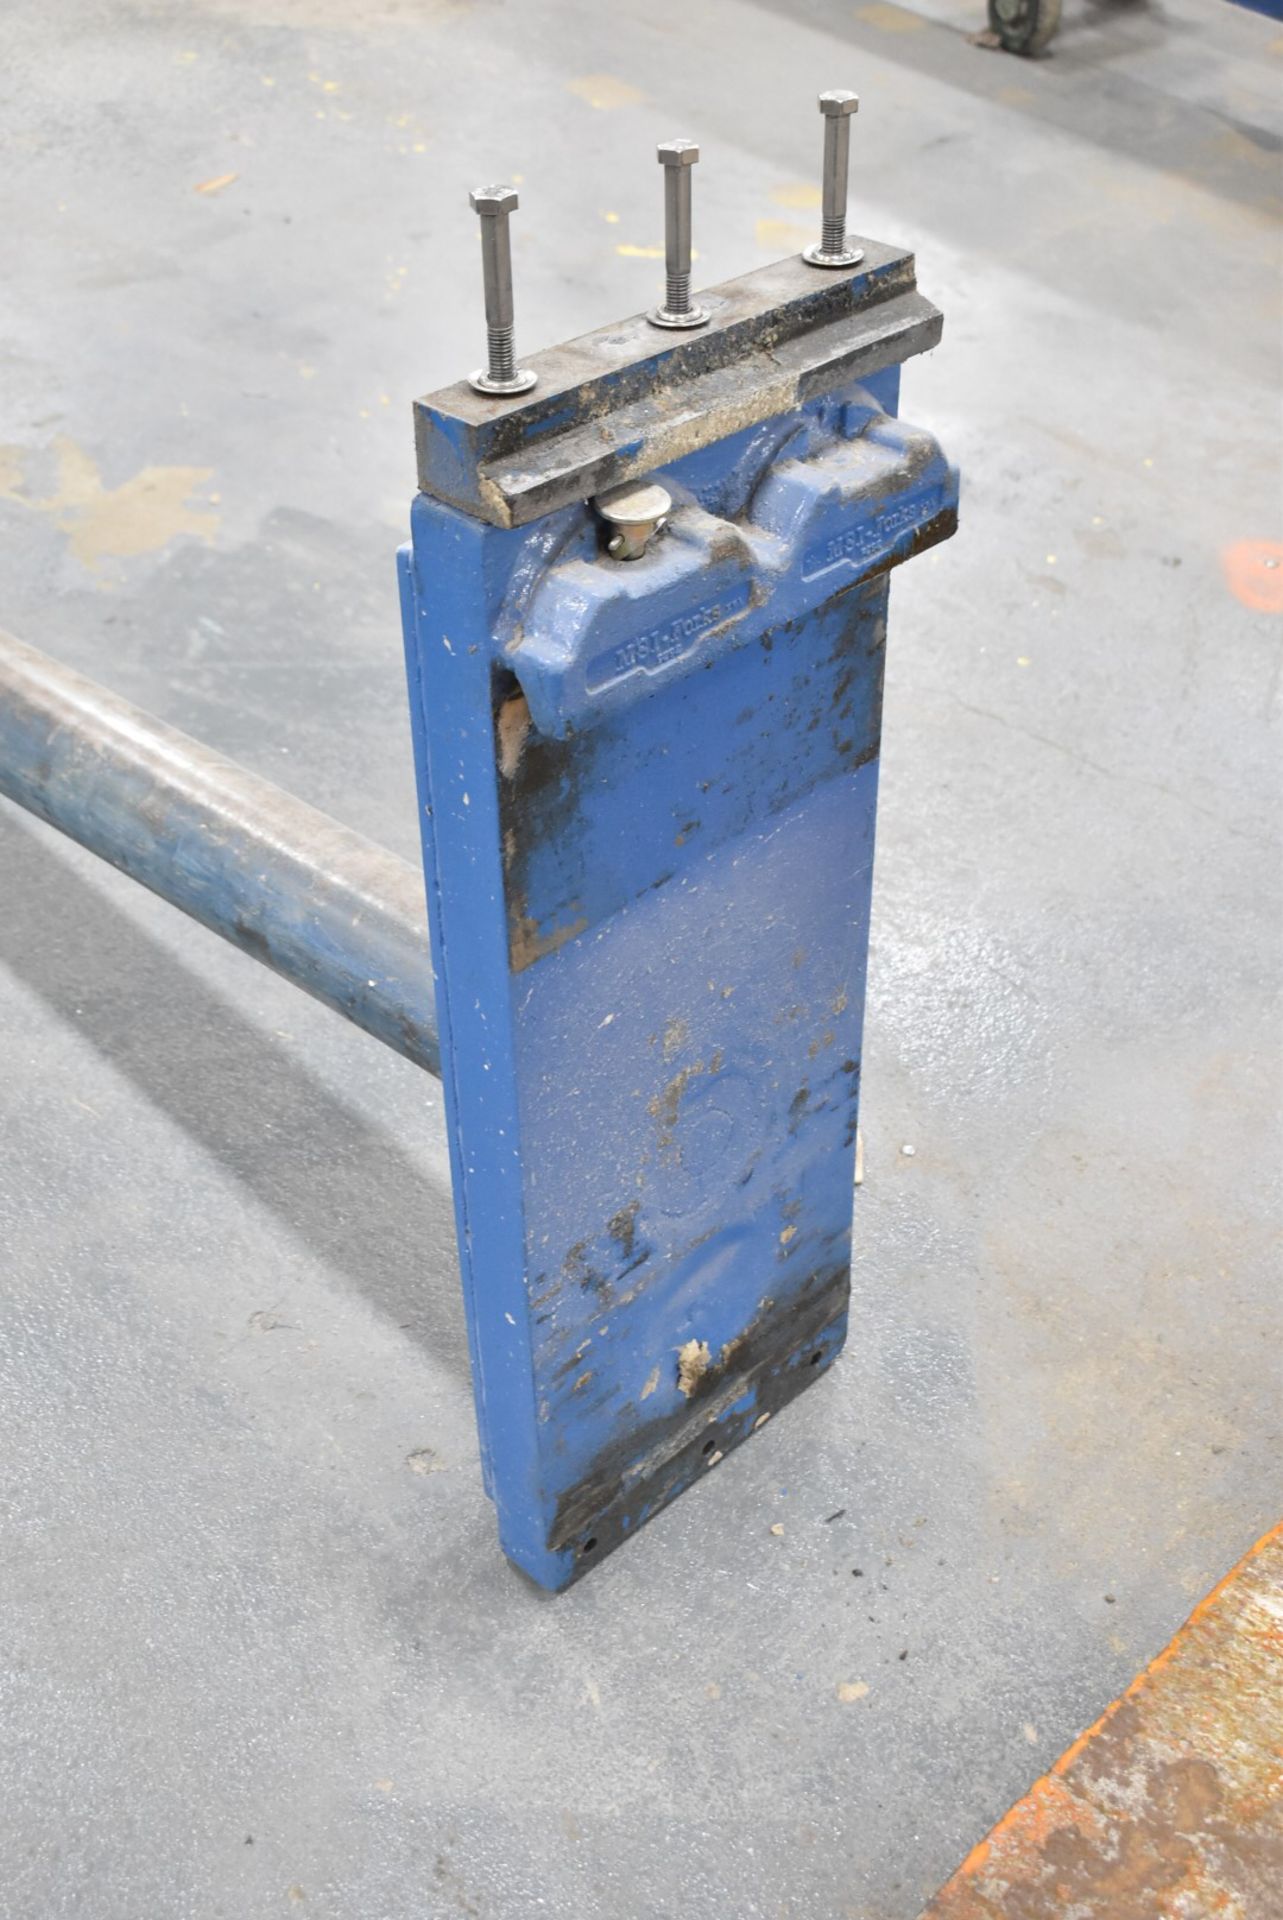 68" L FORKLIFT POLE ATTACHMENT [RIGGING FEES FOR LOT #2269 - $25 USD PLUS APPLICABLE TAXES] - Image 2 of 2